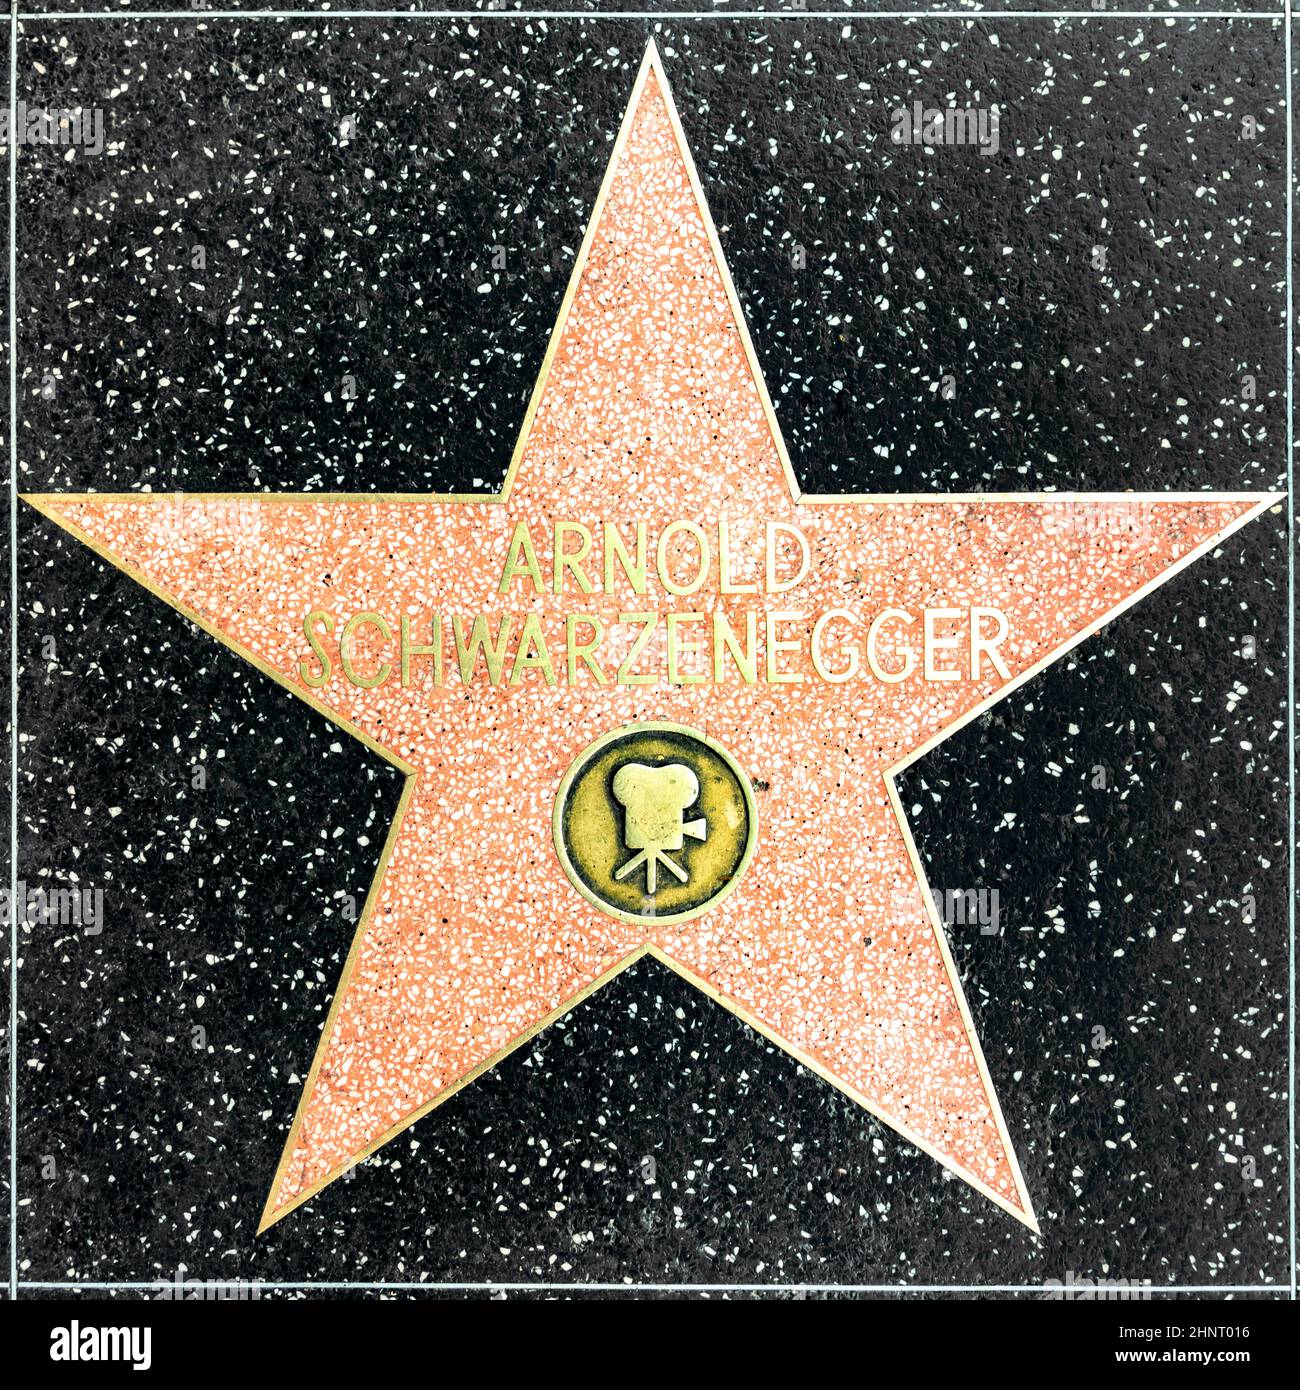 closeup of Star on the Hollywood Walk of Fame for Arnold Schwarzenegger Stock Photo